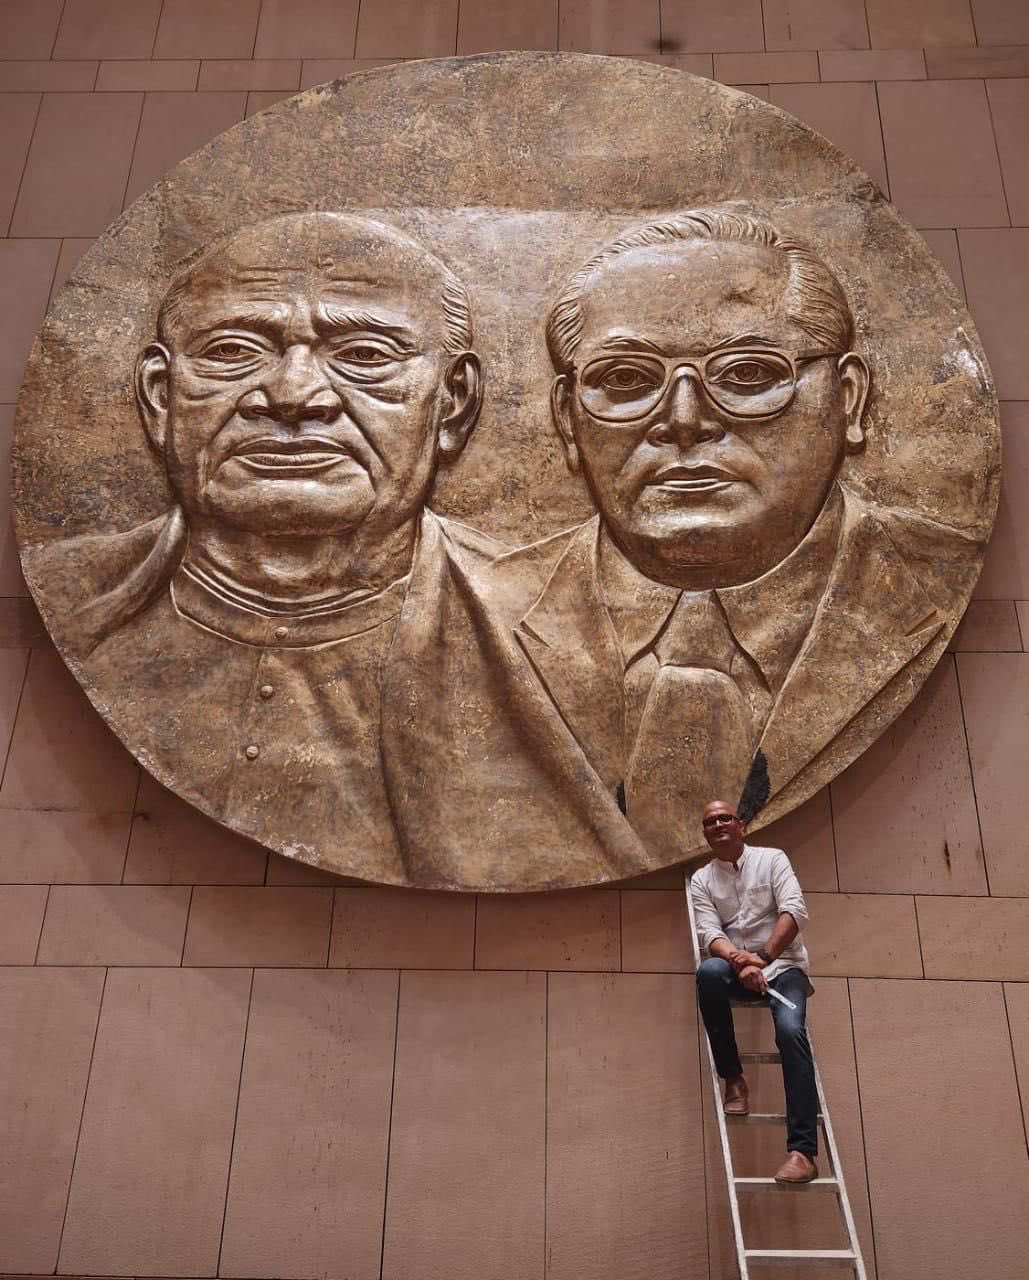 Sculpture of Sardar Vallabhbhai Patel and Dr Babasaheb Ambedkar in new Parliament building